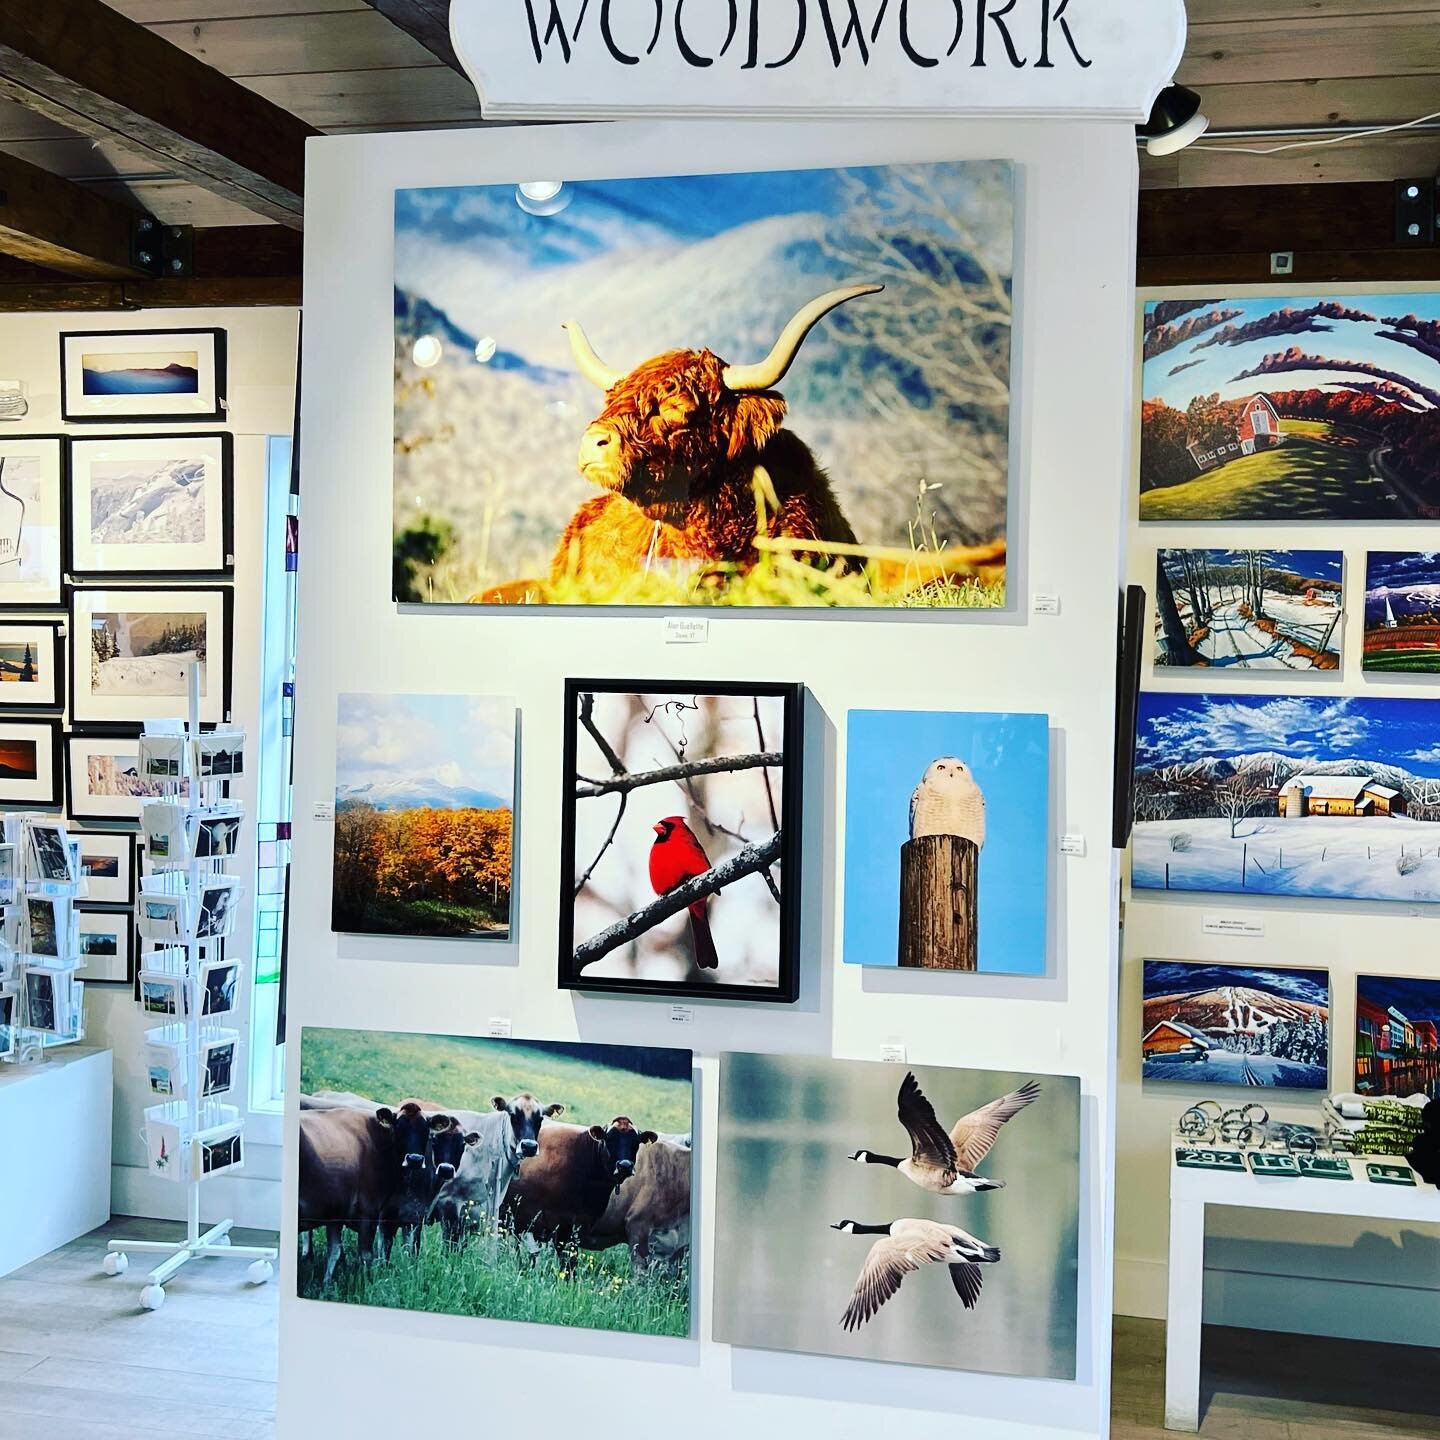 We are thrilled to welcome local photographer Alan Ouellette to Northwood Gallery. His pieces depicting Vermont wildlife and farm animals as well as scenic shots are a beautiful addition to our shop. #stowelocal #photography #scottishhighlandcattle #